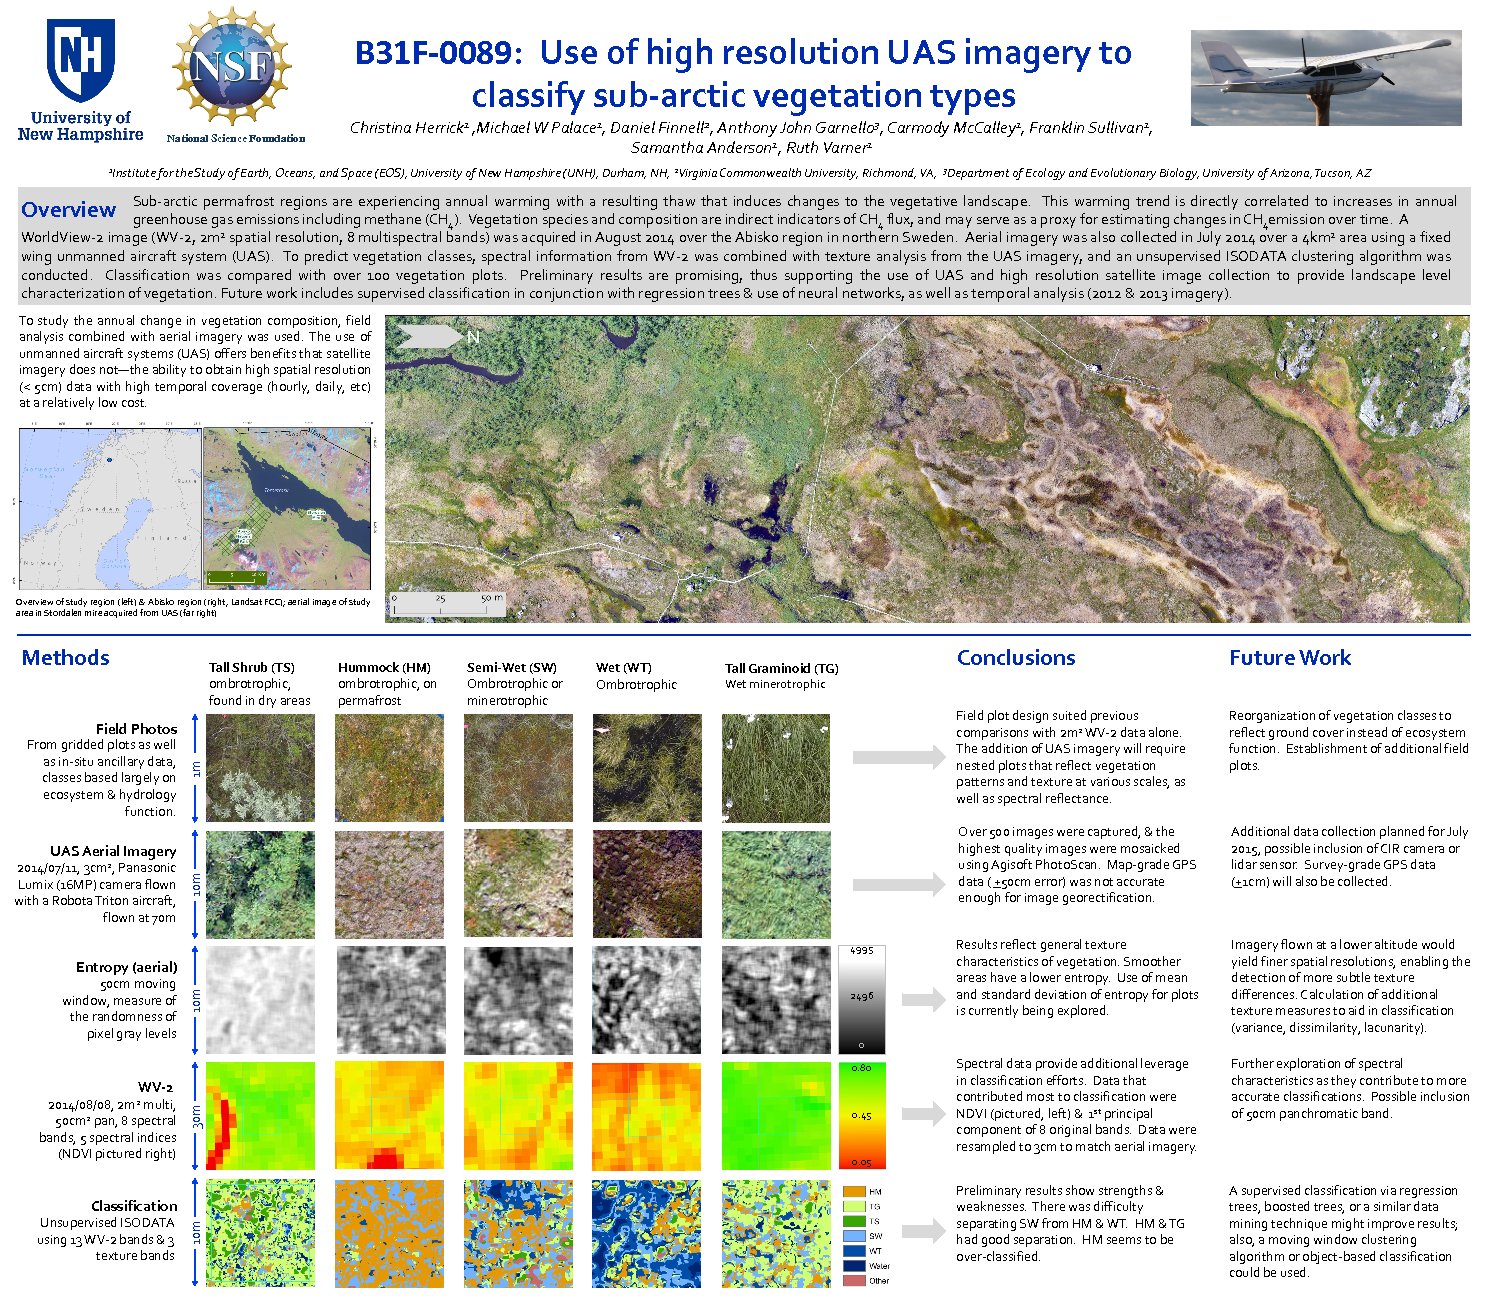 Use Of High Resolution Uas Imagery To Classify Sub-Arctic Vegetation Types by herrick